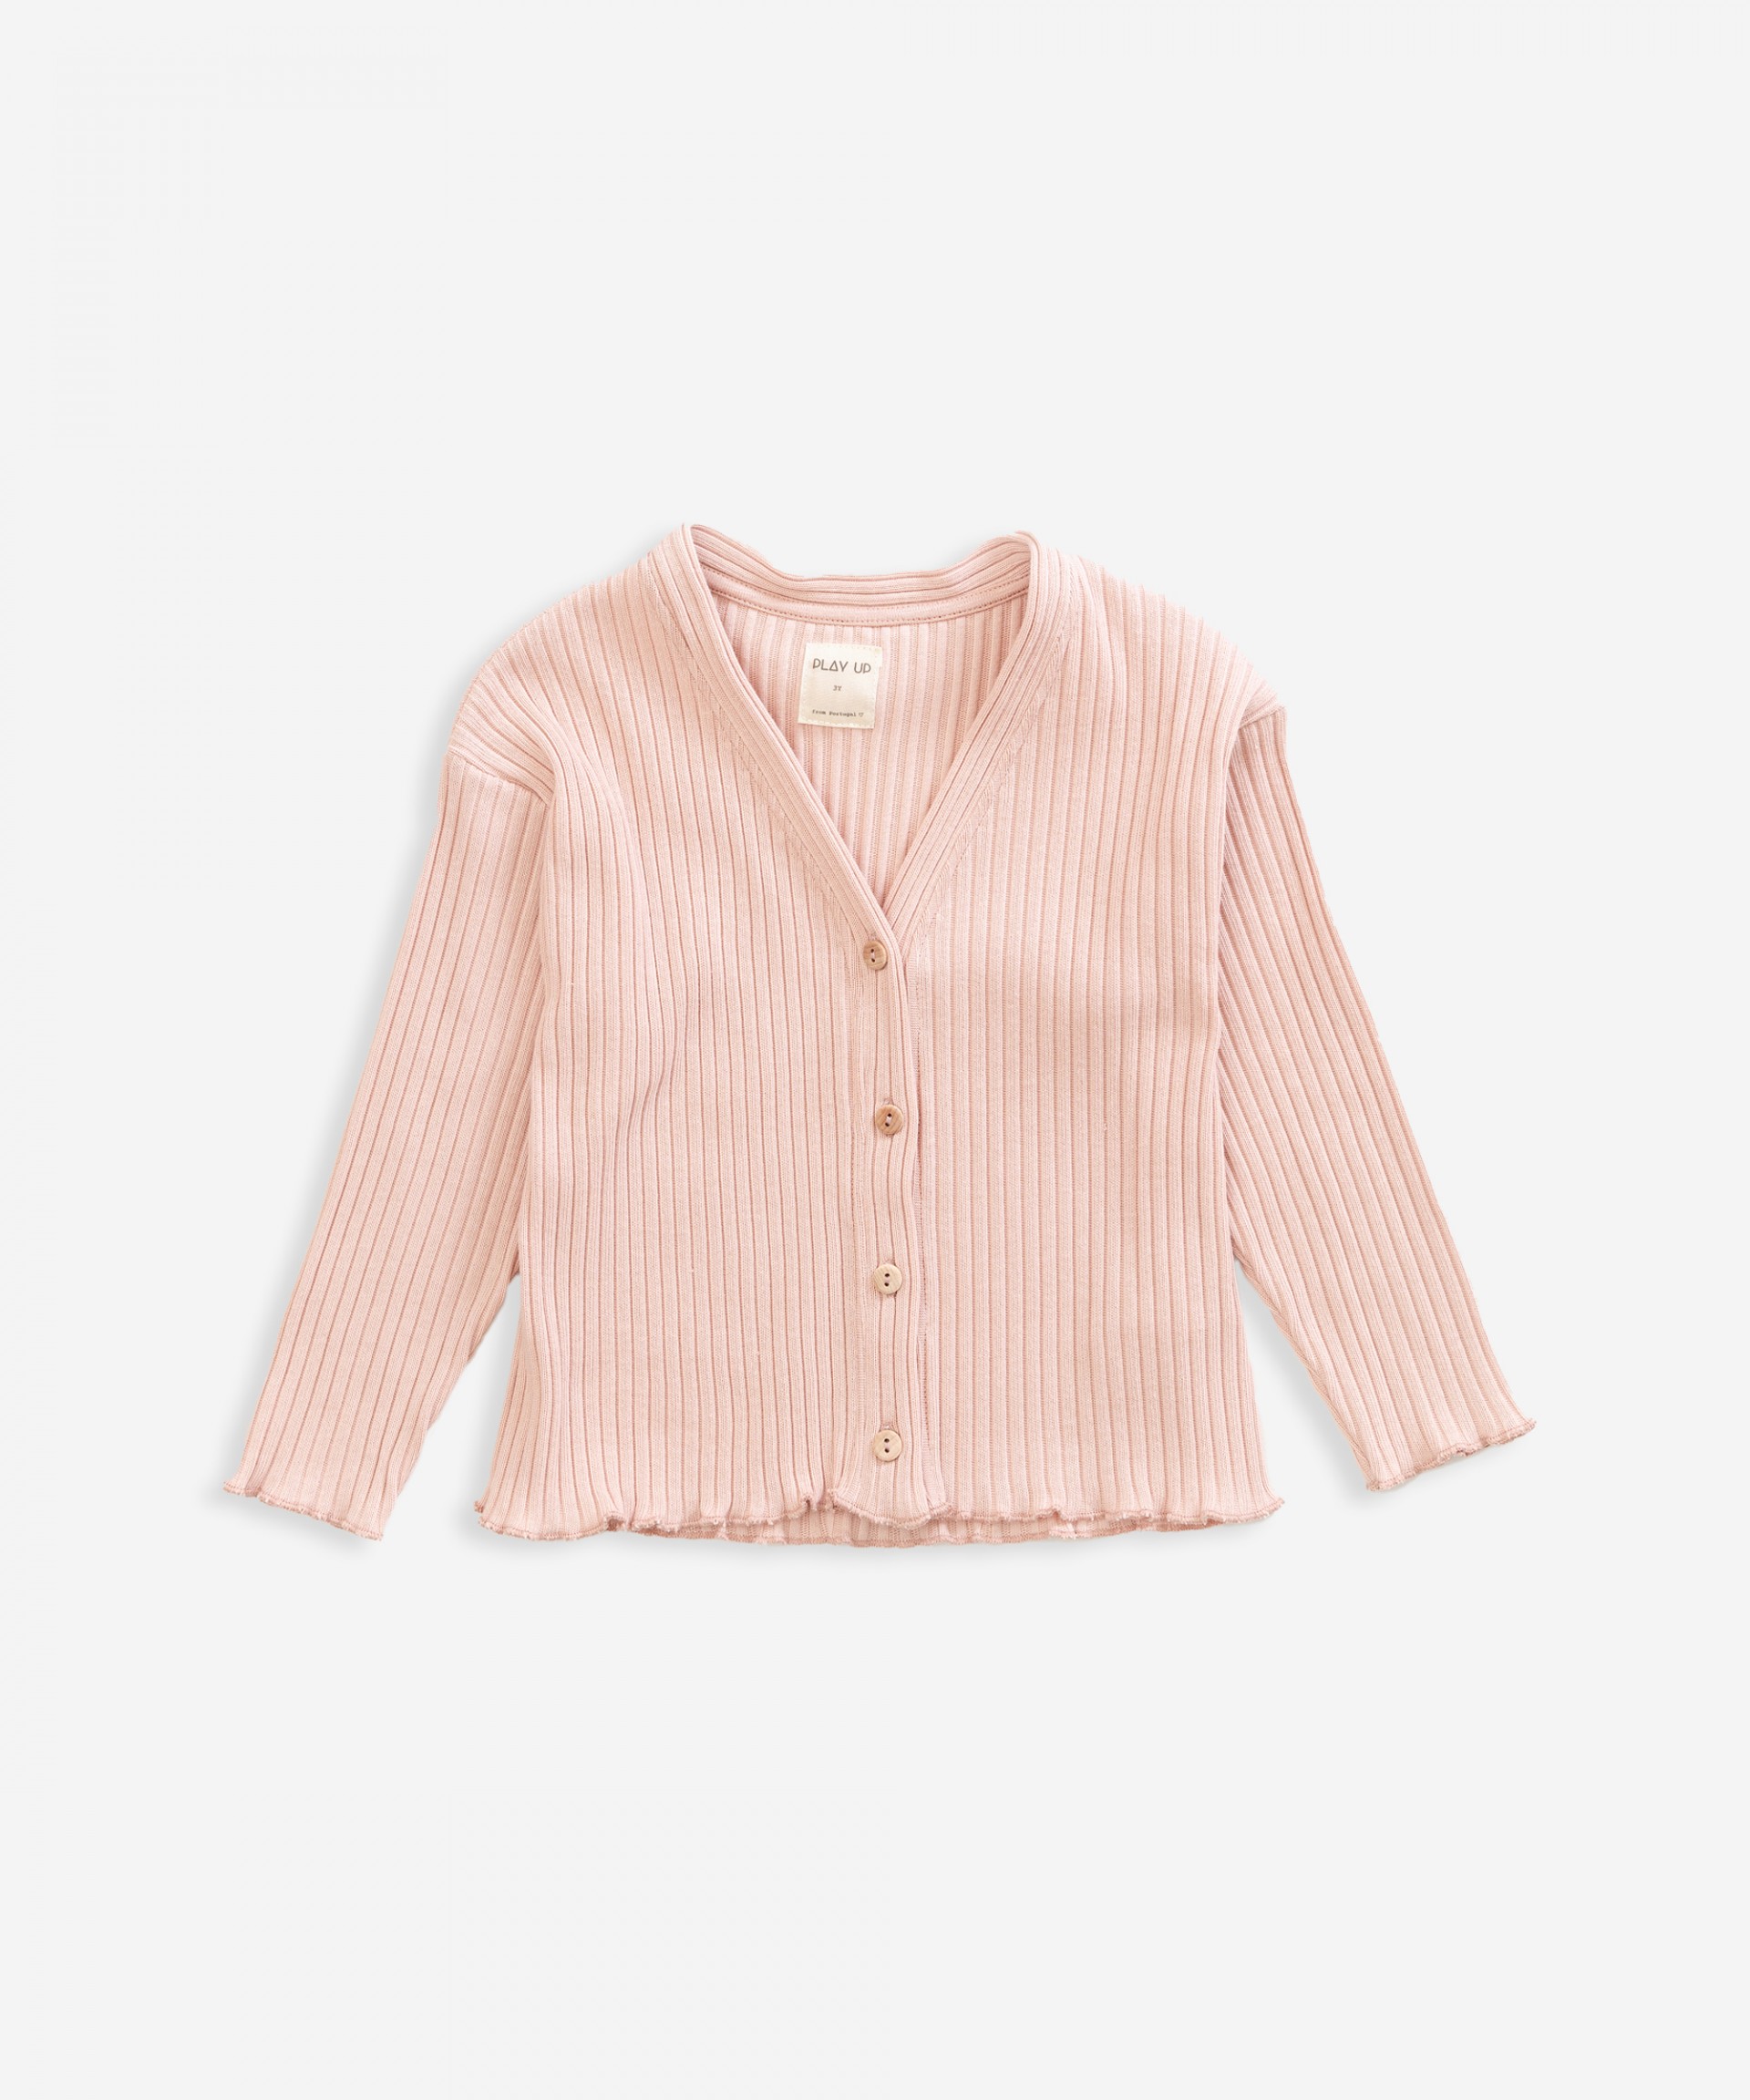 Cardigan with frill | Weaving